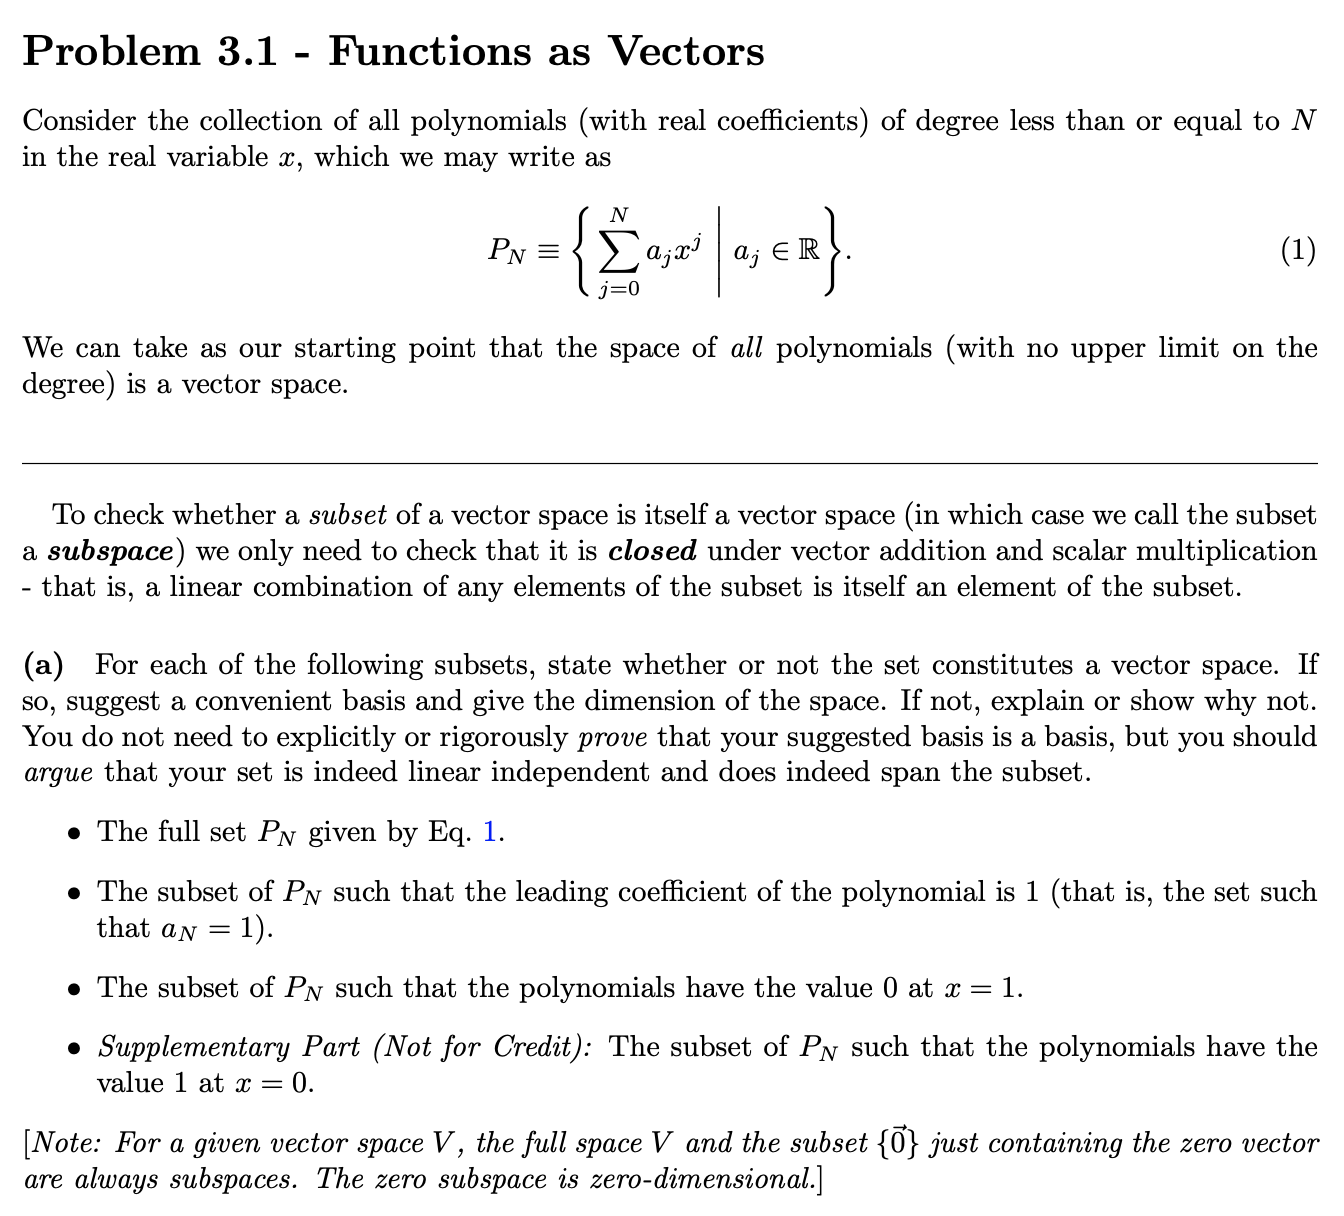 Problem 3.1 - Functions as Vectors
Consider the collection of all polynomials (with real coefficients) of degree less than or equal to N
in the real variable x, which we may write as
{È
N
Σ ατ'
(1)
PN =
a; El
j=0
{x>
We can take as our starting point that the space of all polynomials (with no upper limit on the
degree) is a vector space.
To check whether a subset of a vector space is itself a vector space (in which case we call the subset
a subspace) we only need to check that it is closed under vector addition and scalar multiplication
that is, a linear combination of any elements of the subset is itself an element of the subset.
(a) For each of the following subsets, state whether or not the set constitutes a vector space. If
so, suggest a convenient basis and give the dimension of the space. If not, explain or show why not.
You do not need to explicitly or rigorously prove that your suggested basis is a basis, but you should
argue that your set is indeed linear independent and does indeed span the subset.
• The full set PN given by Eq. 1.
• The subset of PN such that the leading coefficient of the polynomial is 1 (that is, the set such
that aN =
= 1).
• The subset of PN such that the polynomials have the value 0 at x = 1.
• Supplementary Part (Not for Credit): The subset of PN such that the polynomials have the
value 1 at x =
0.
[Note: For a given vector space V, the full space V and the subset {0} just containing the zero vector
are always subspaces. The zero subspace is zero-dimensional.]
